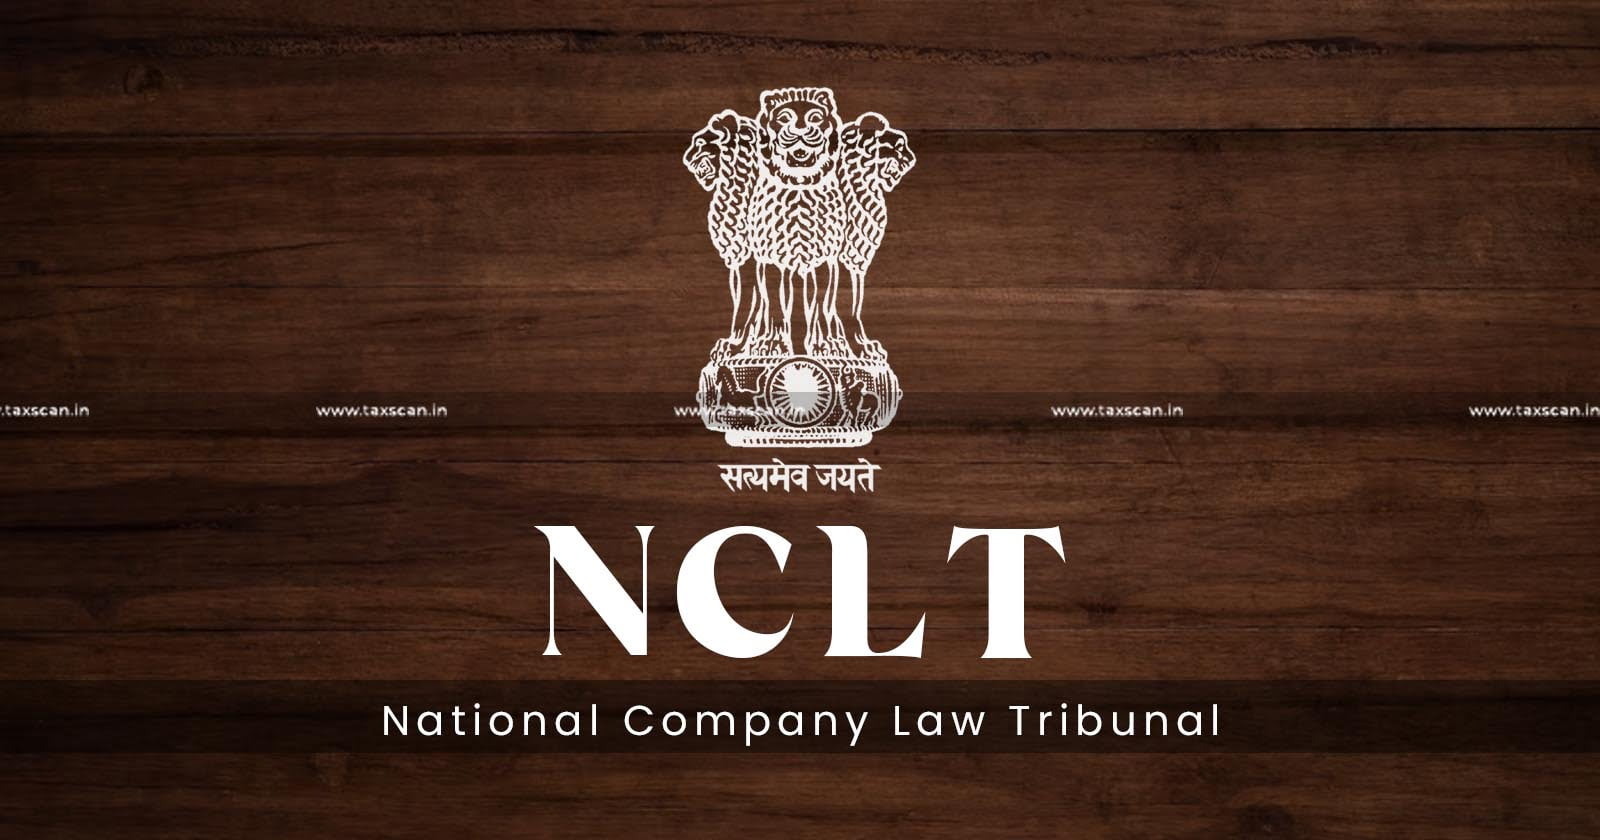 NCLT Mumbai - No Claim to be Admitted after Approval - tax news - Taxscan